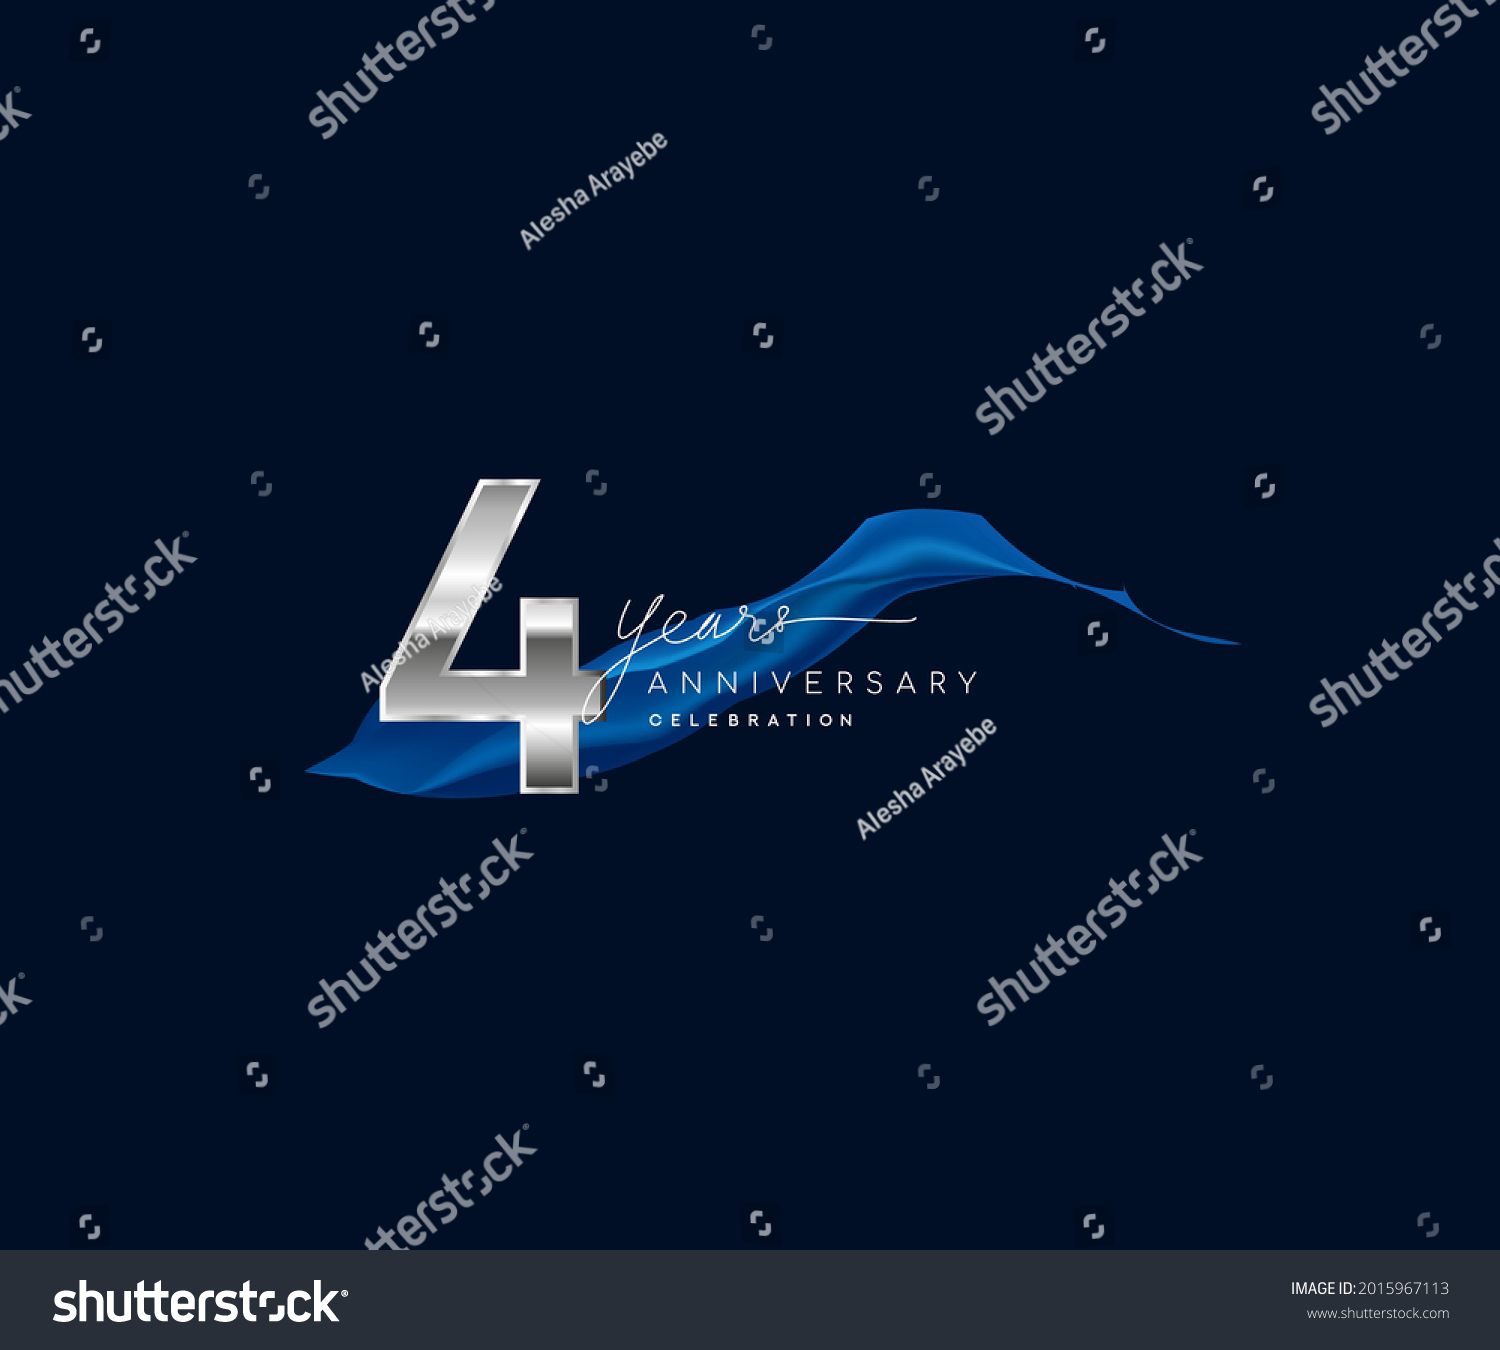 SVG of 4th Years Anniversary celebration logotype silver colored with blue ribbon and isolated on dark blue background svg